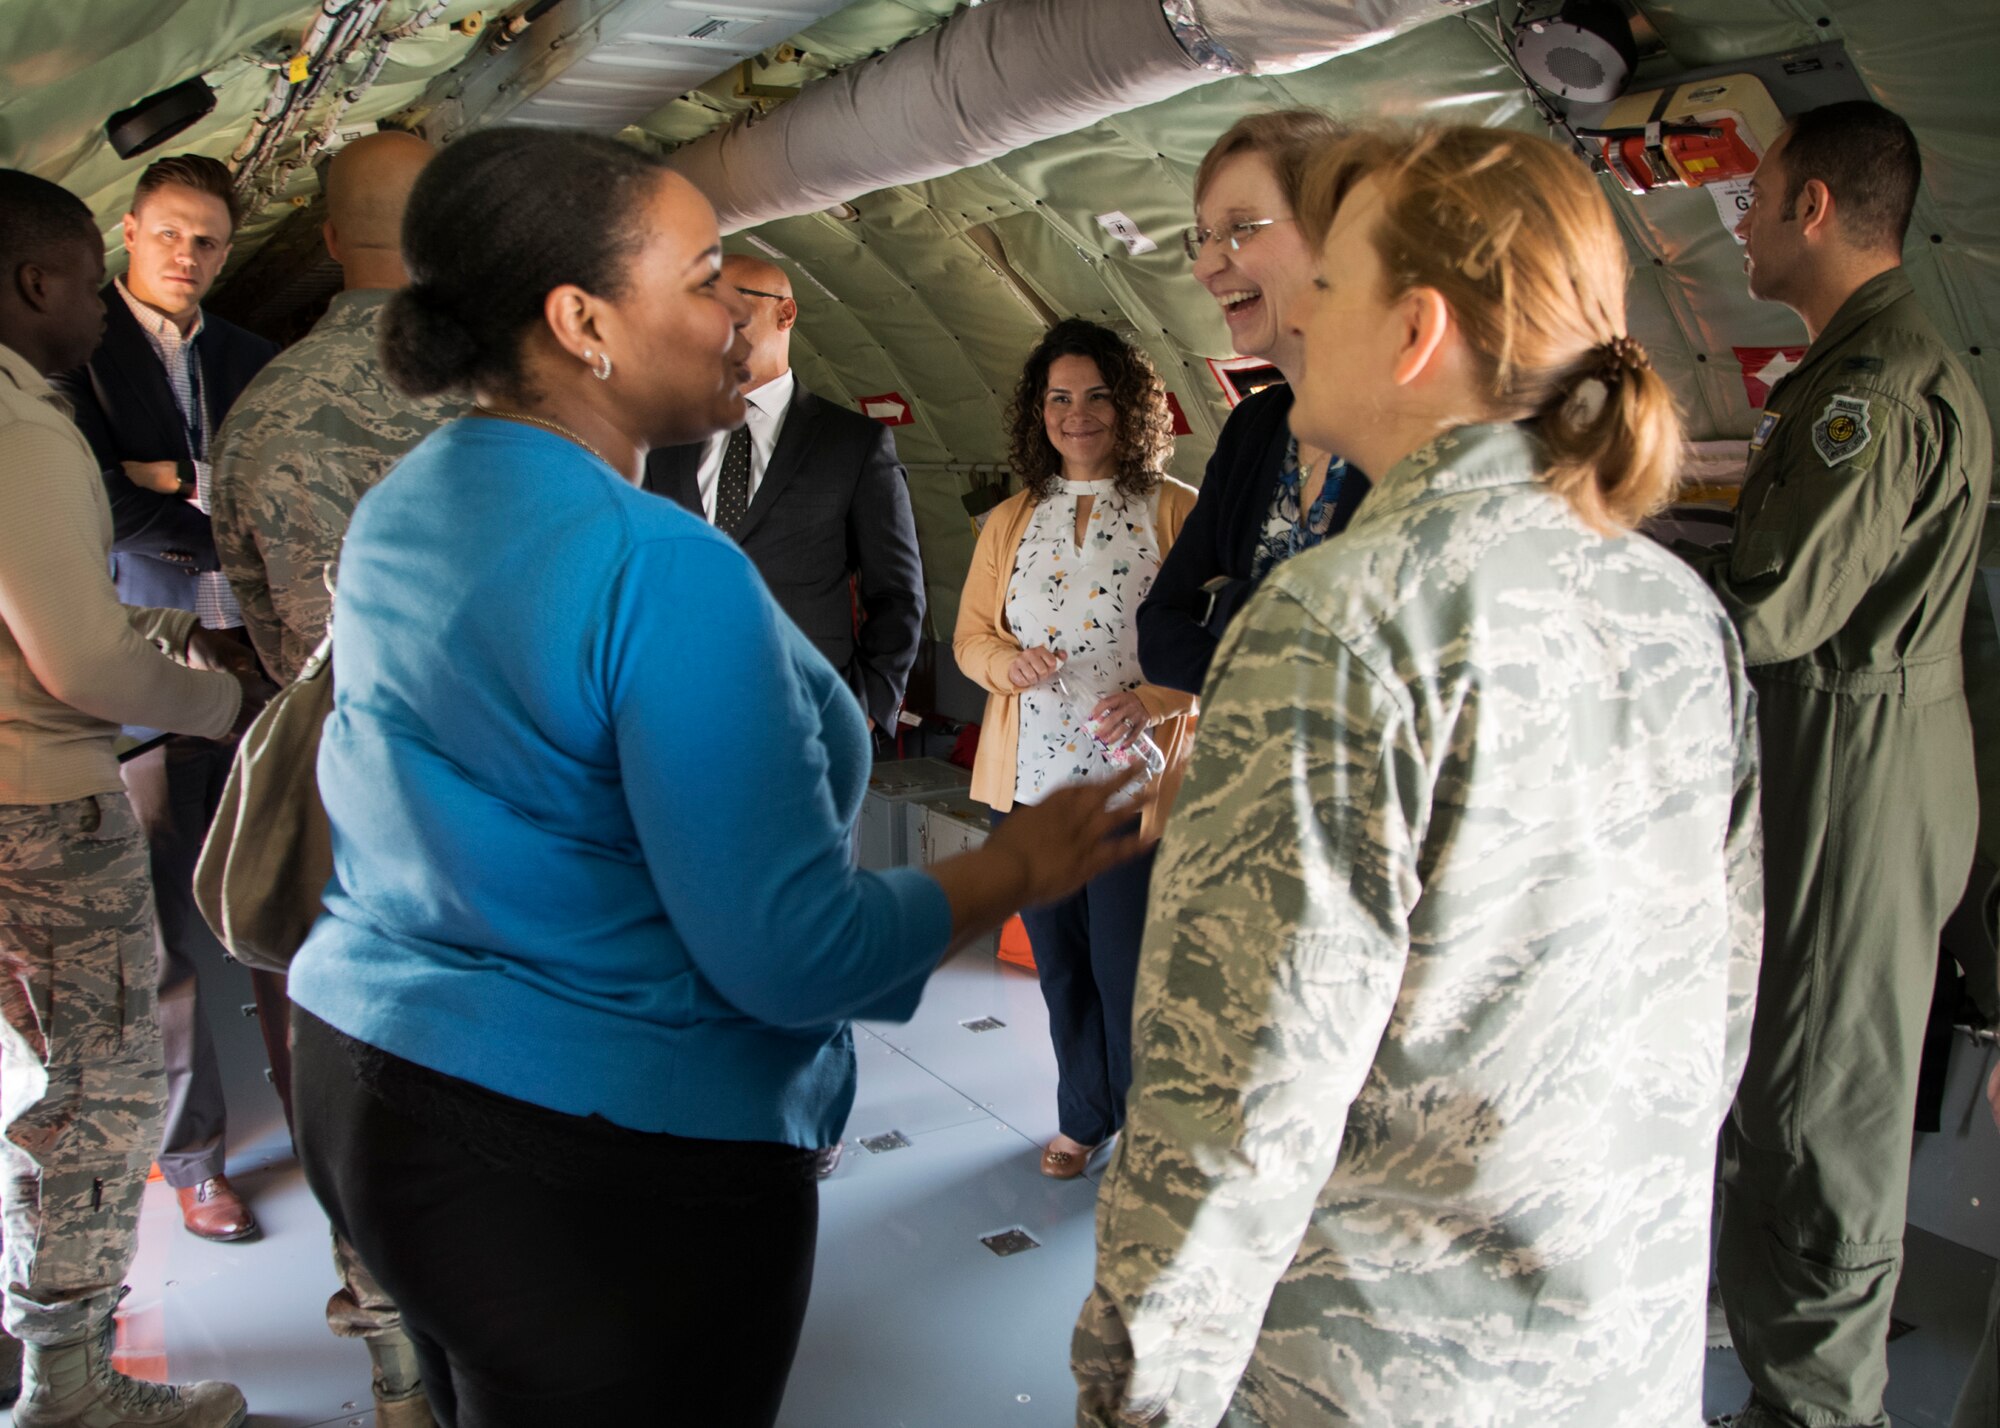 Members of Headquarters Air Force speak with Airmen from the 459th while touring a KC-135 Stratotanker Oct. 7, 2019 on Joint Base Andrews, Md. The team was briefed on the KC-135 and given a tour of the aircraft. (U.S. Air Force photo by Staff Sgt. Cierra Presentado/Released)